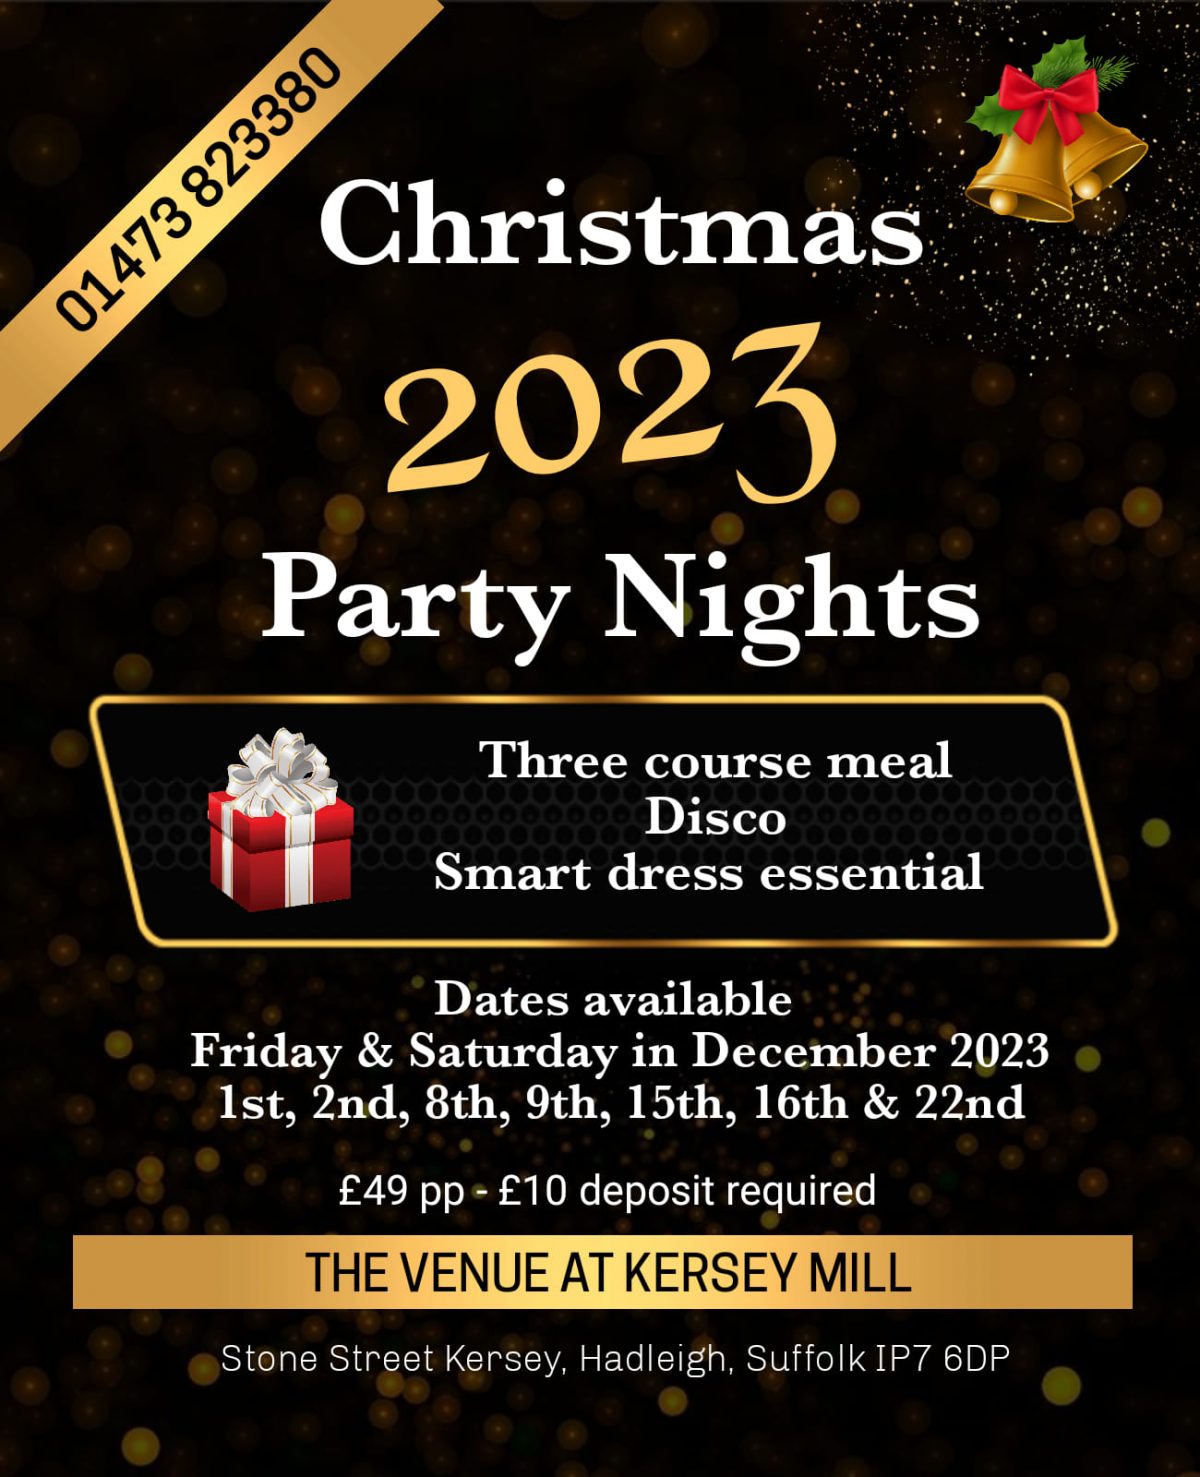 Christmas Party Nights The Venue at Kersey Mill